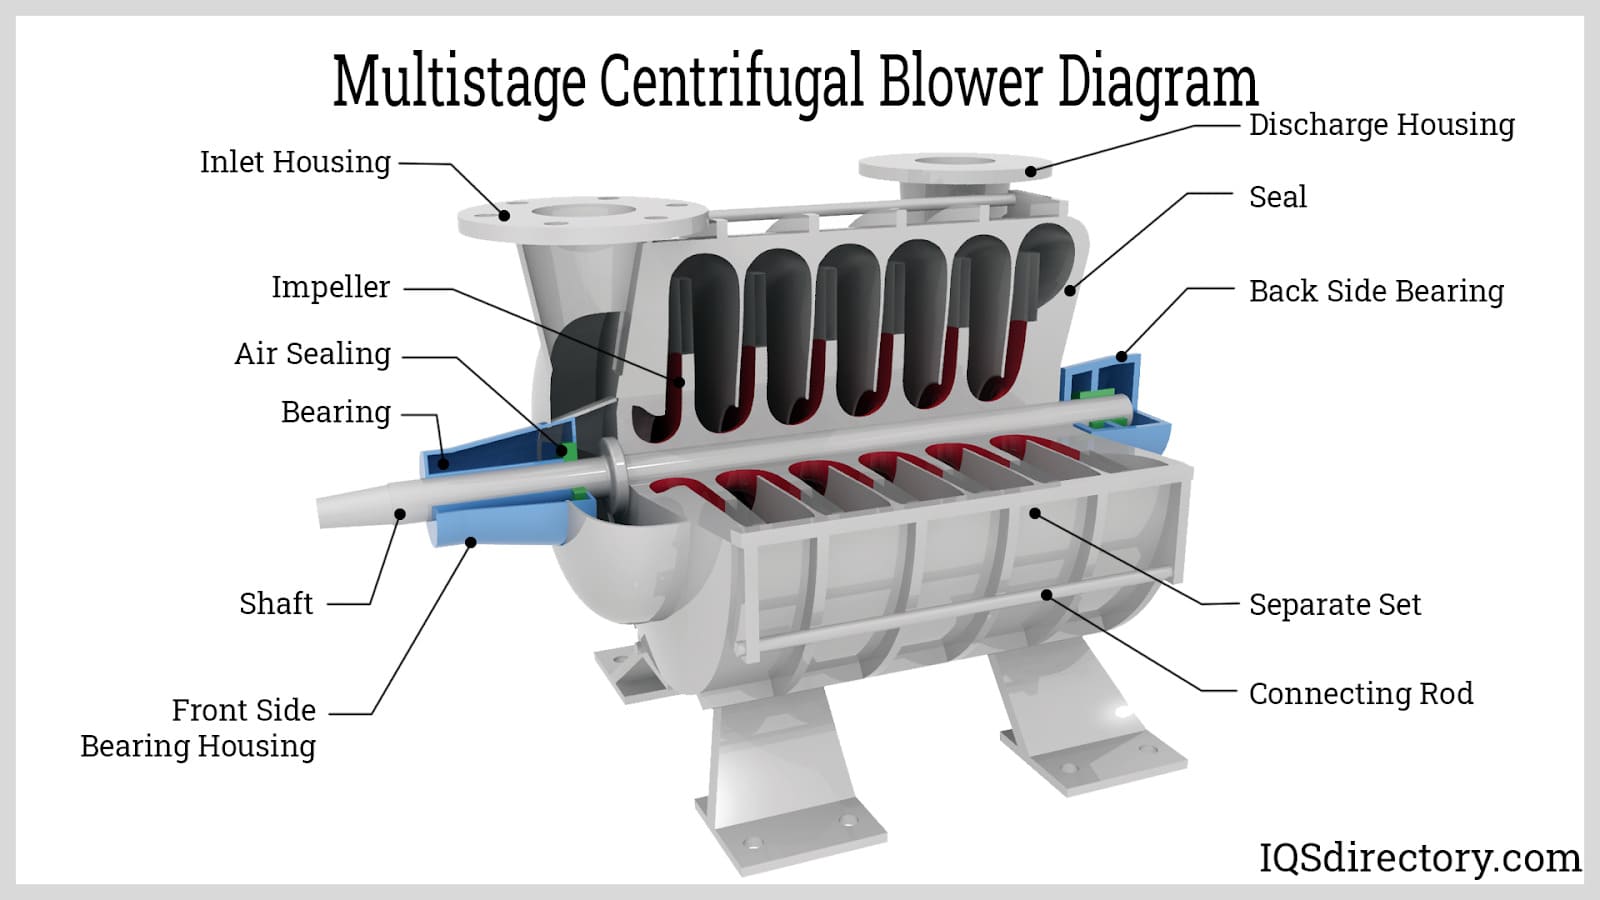 Multistage Centrifugal Blower Diagram